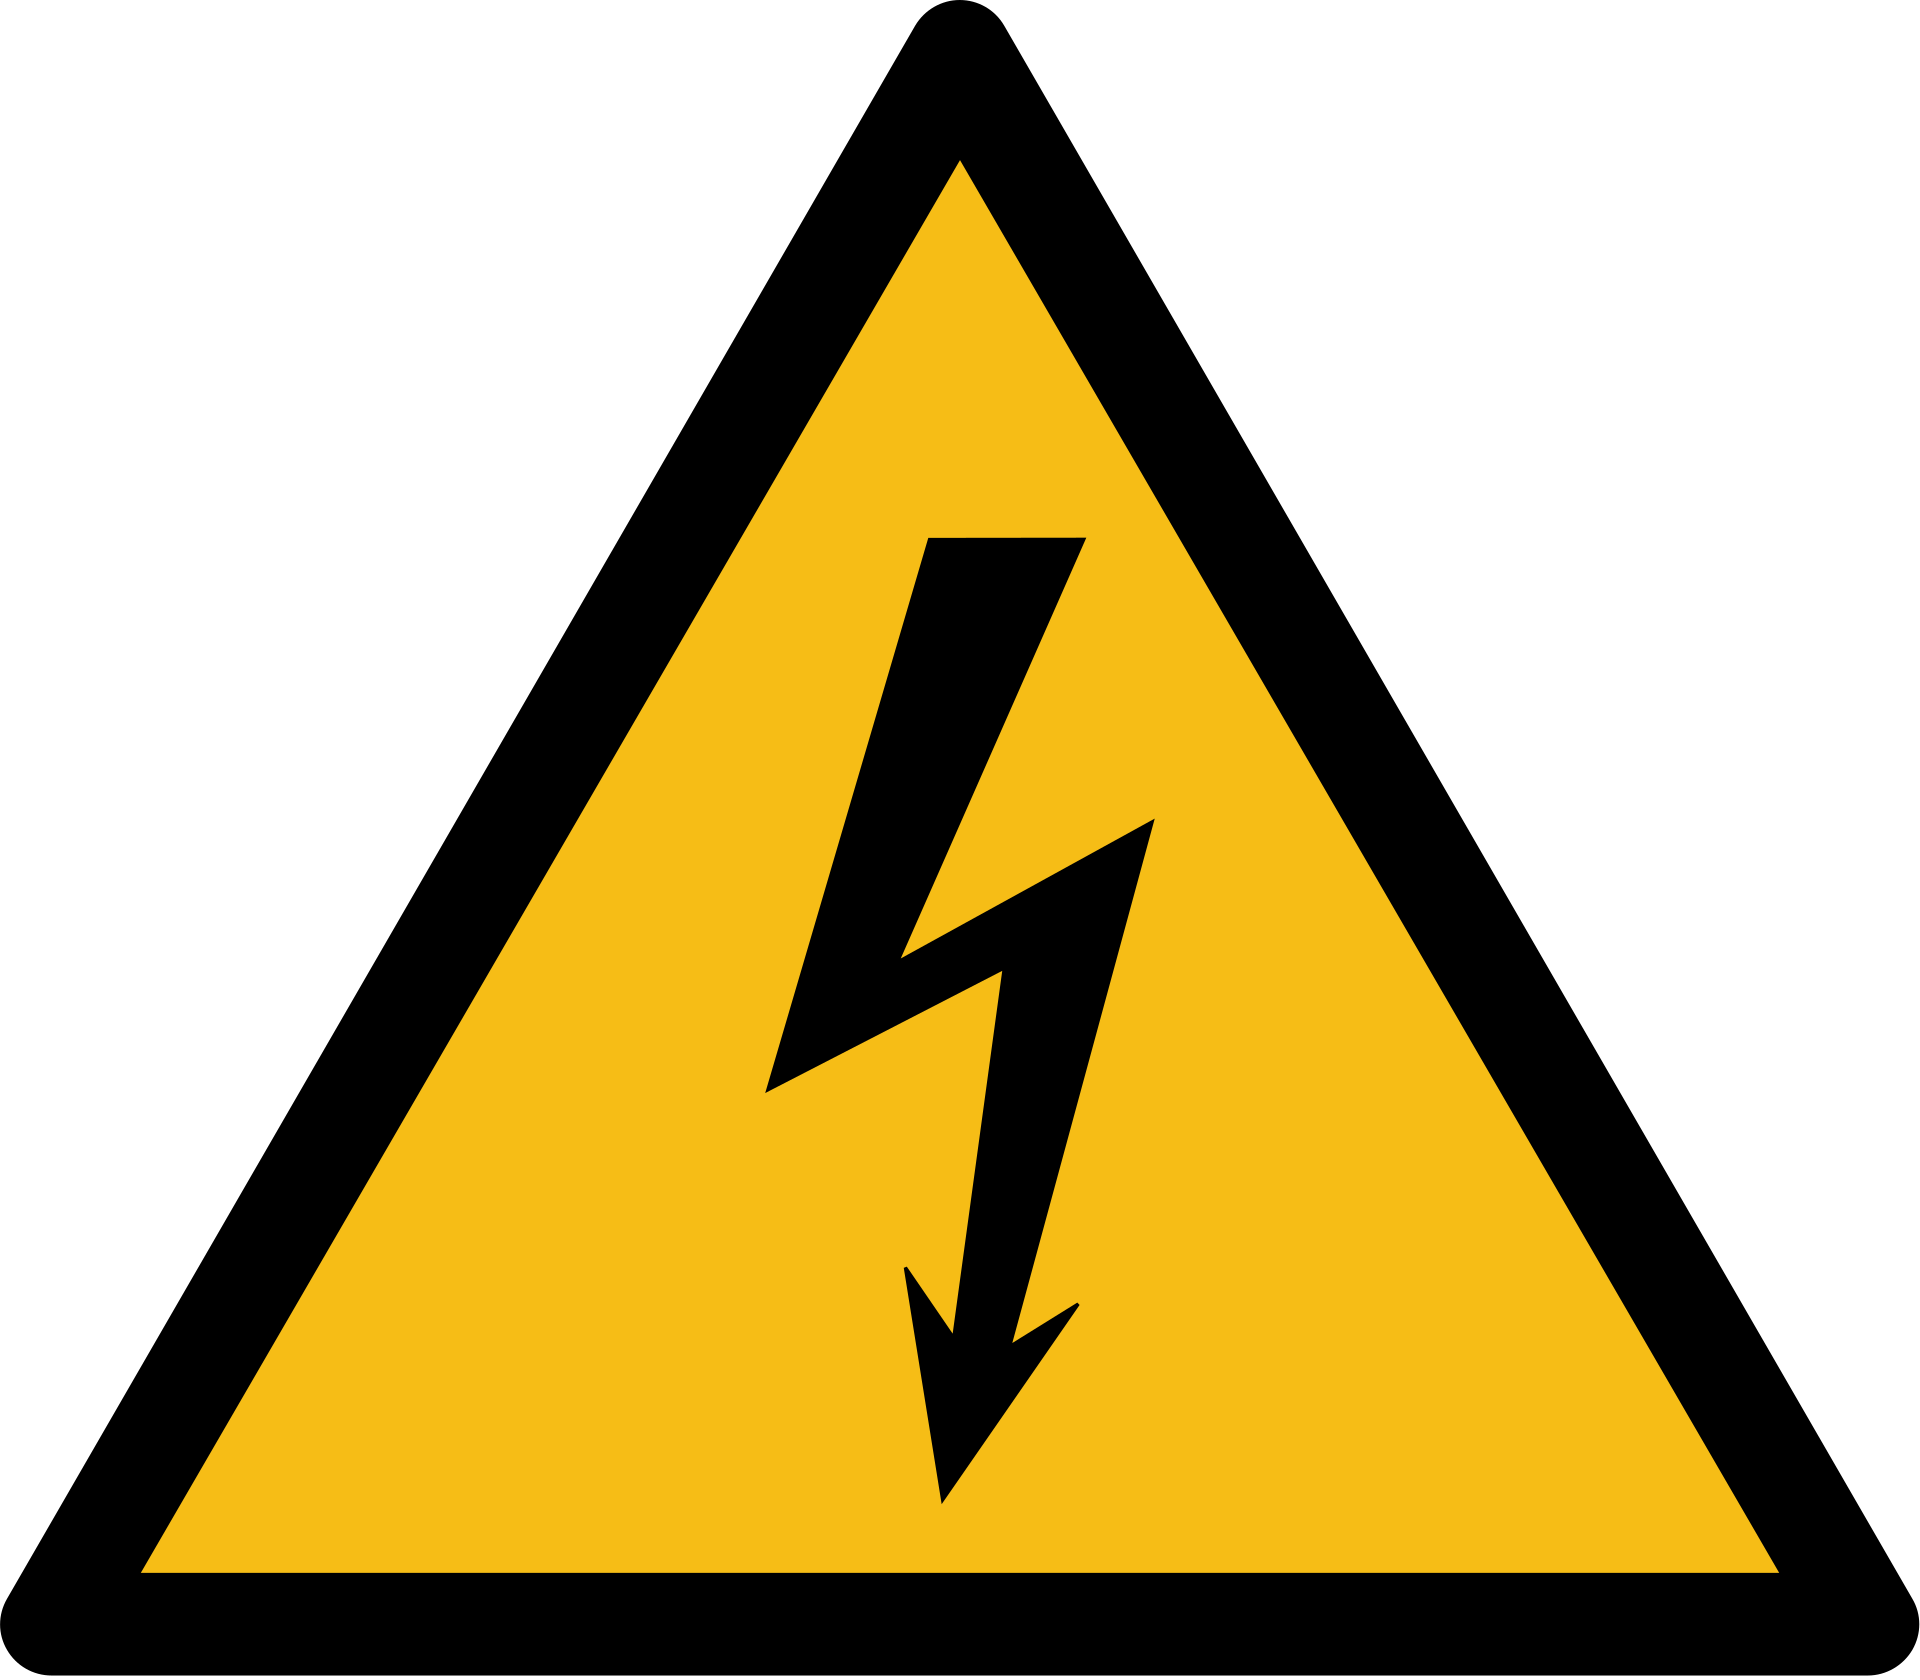 ISO 7010 - Yellow triangle with a black arrow-tip spark shape